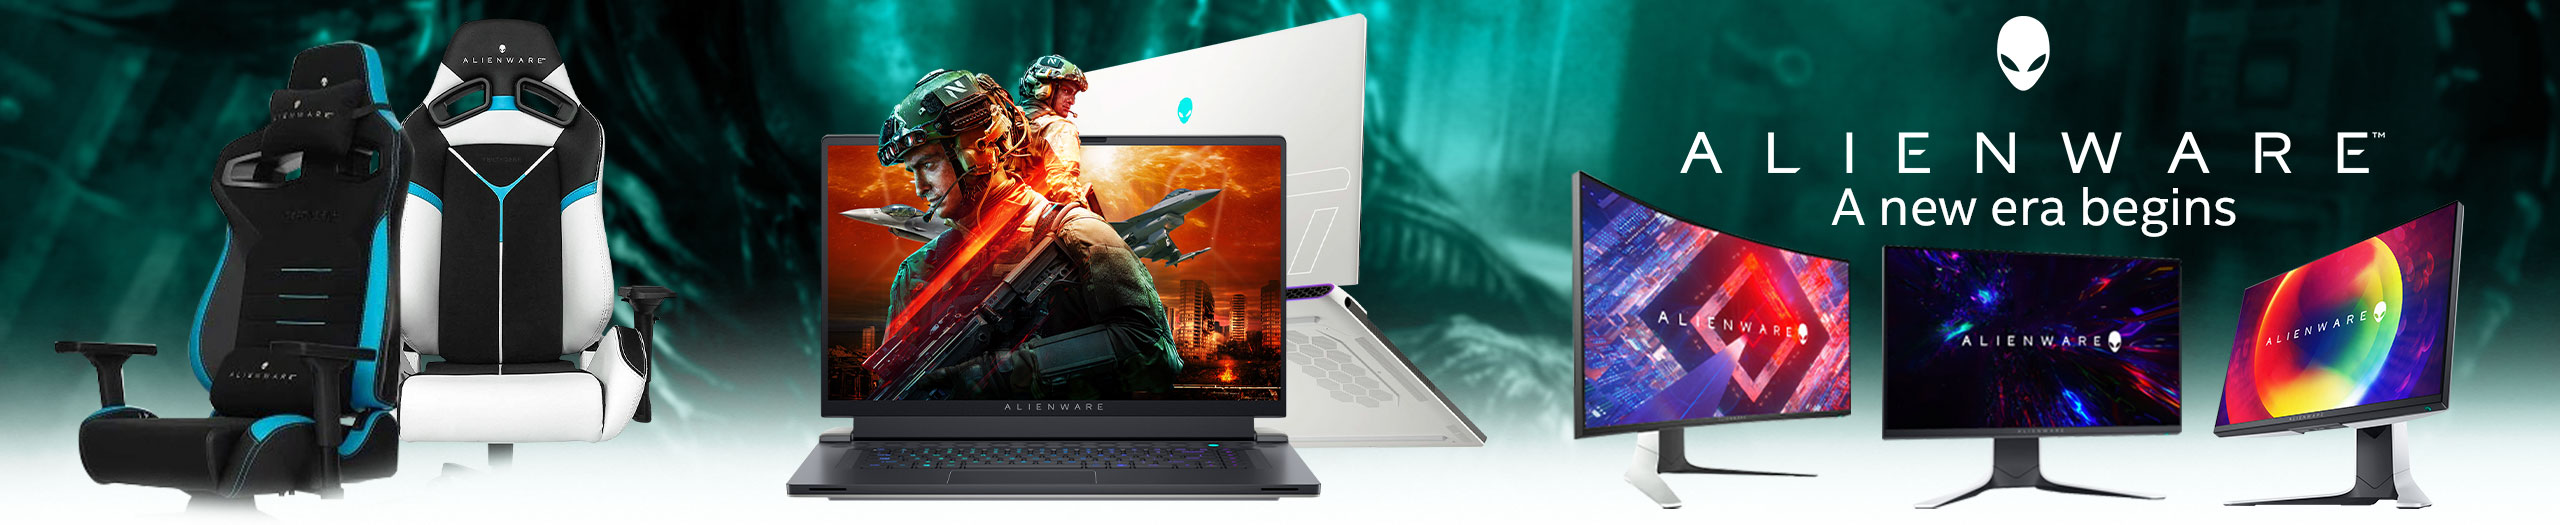 Alienware South Africa